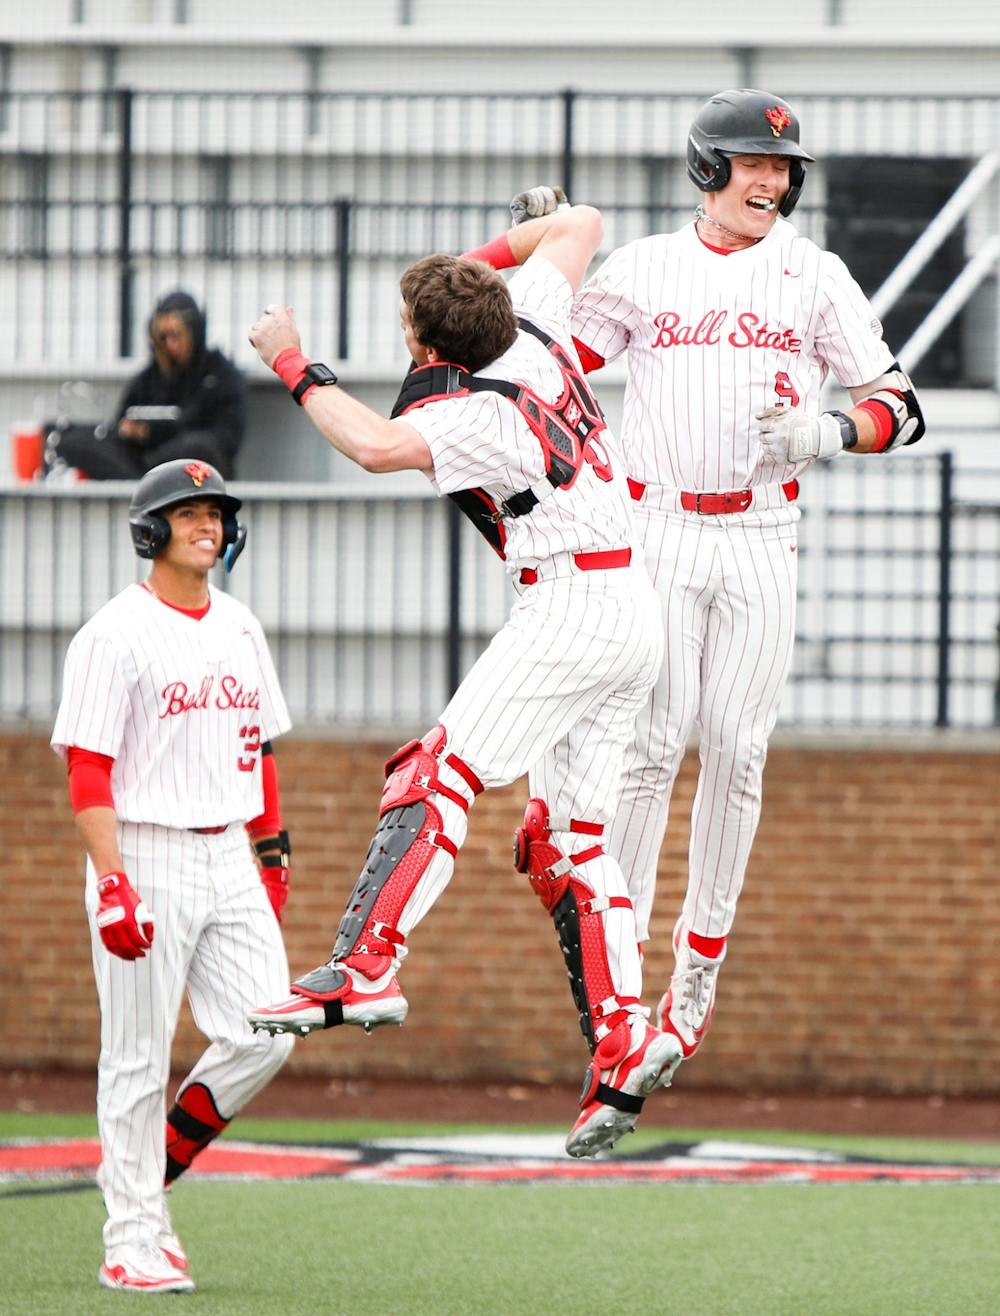 <p>First baseman Blake Bevis celebrates after hitting a home run against Southern Indiana March 26 at First Merchants Ballpark Complex. Andrew Berger, DN</p>